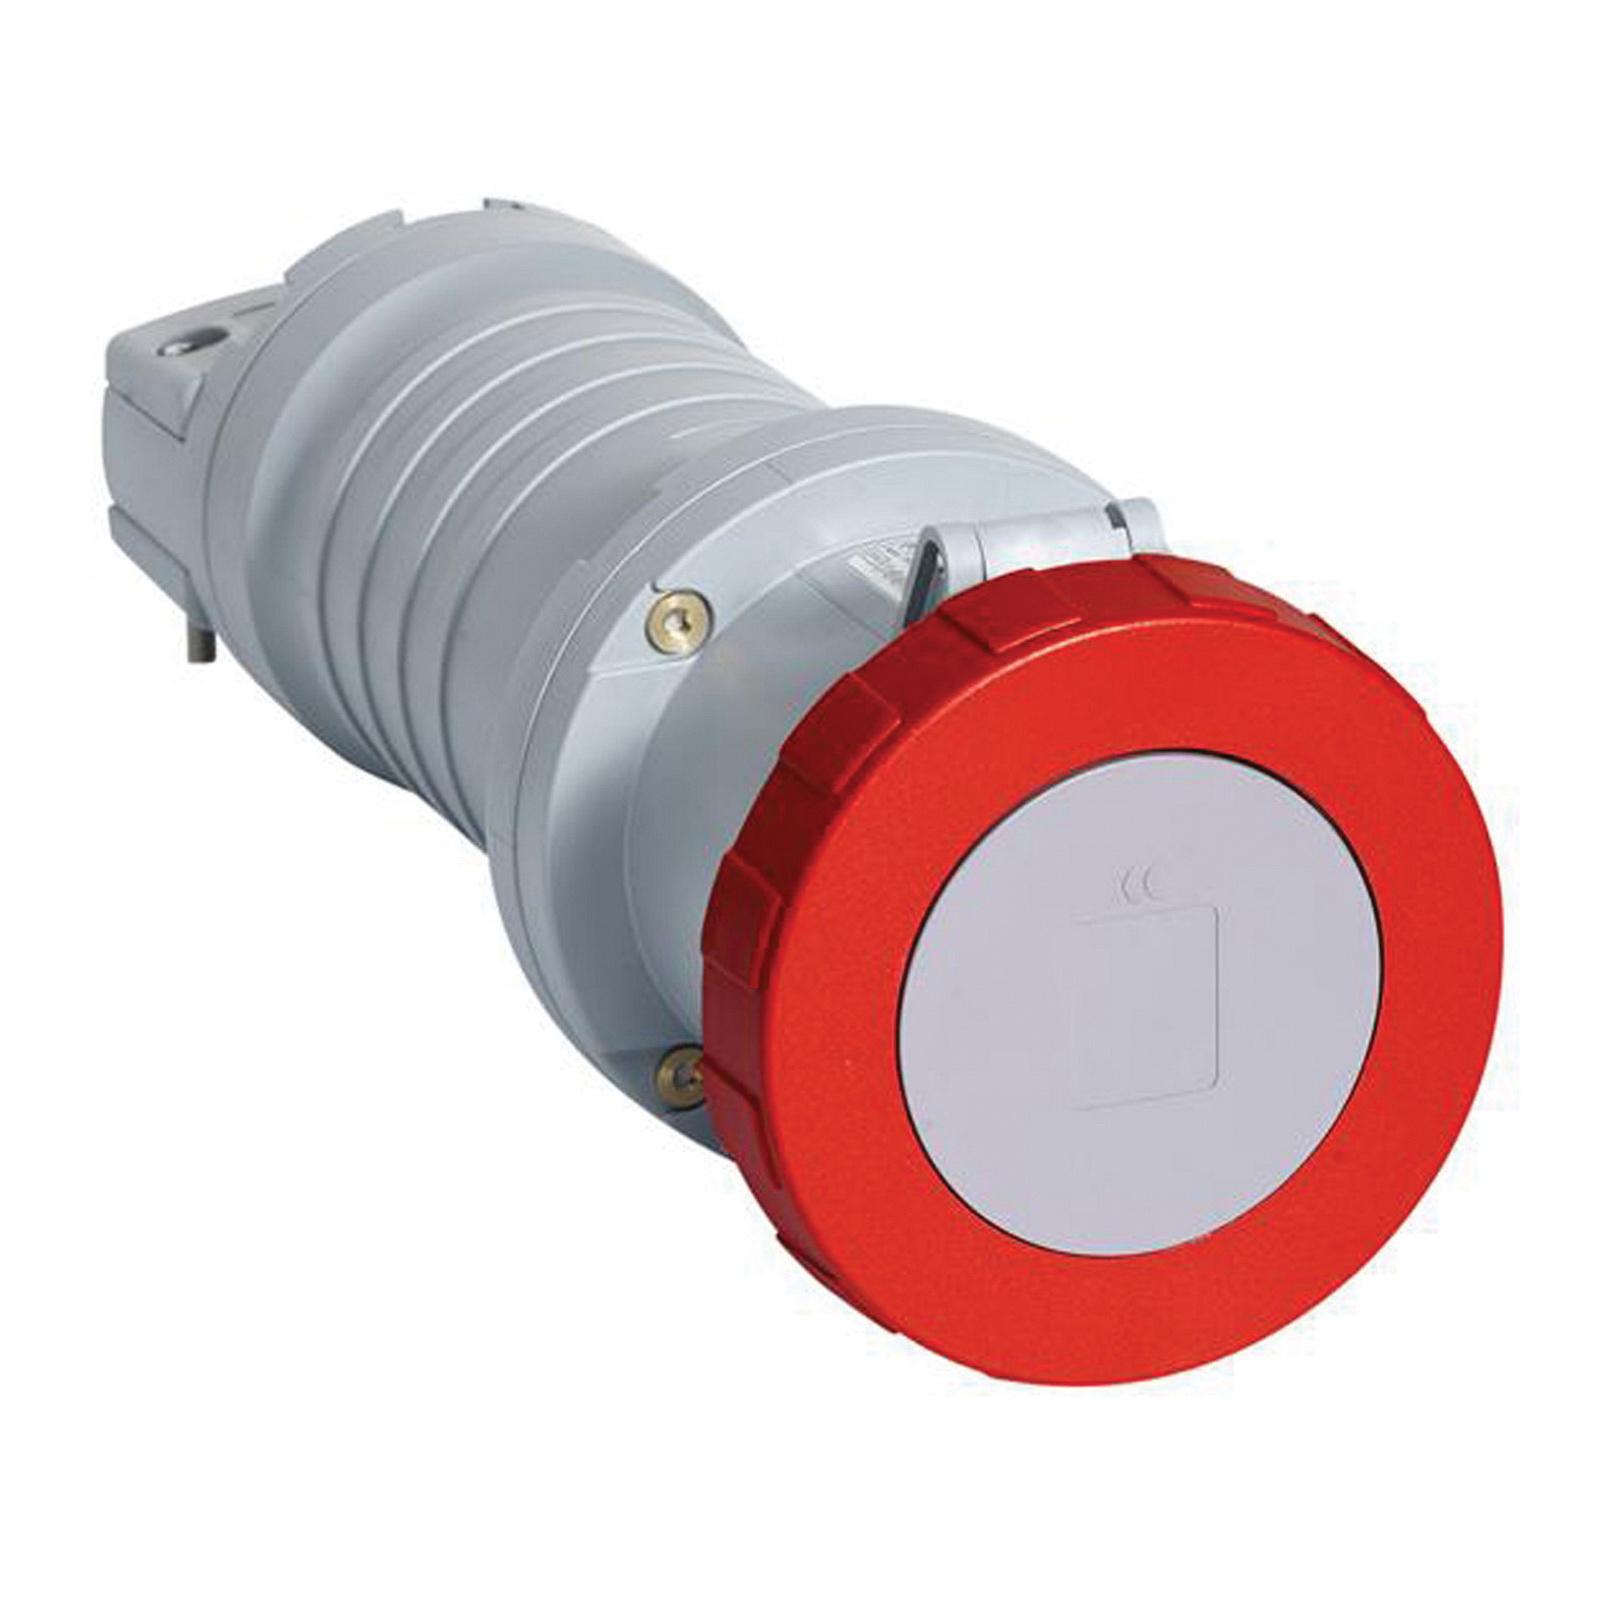 ABB ABB4100C7W Pin and Sleeve Connector